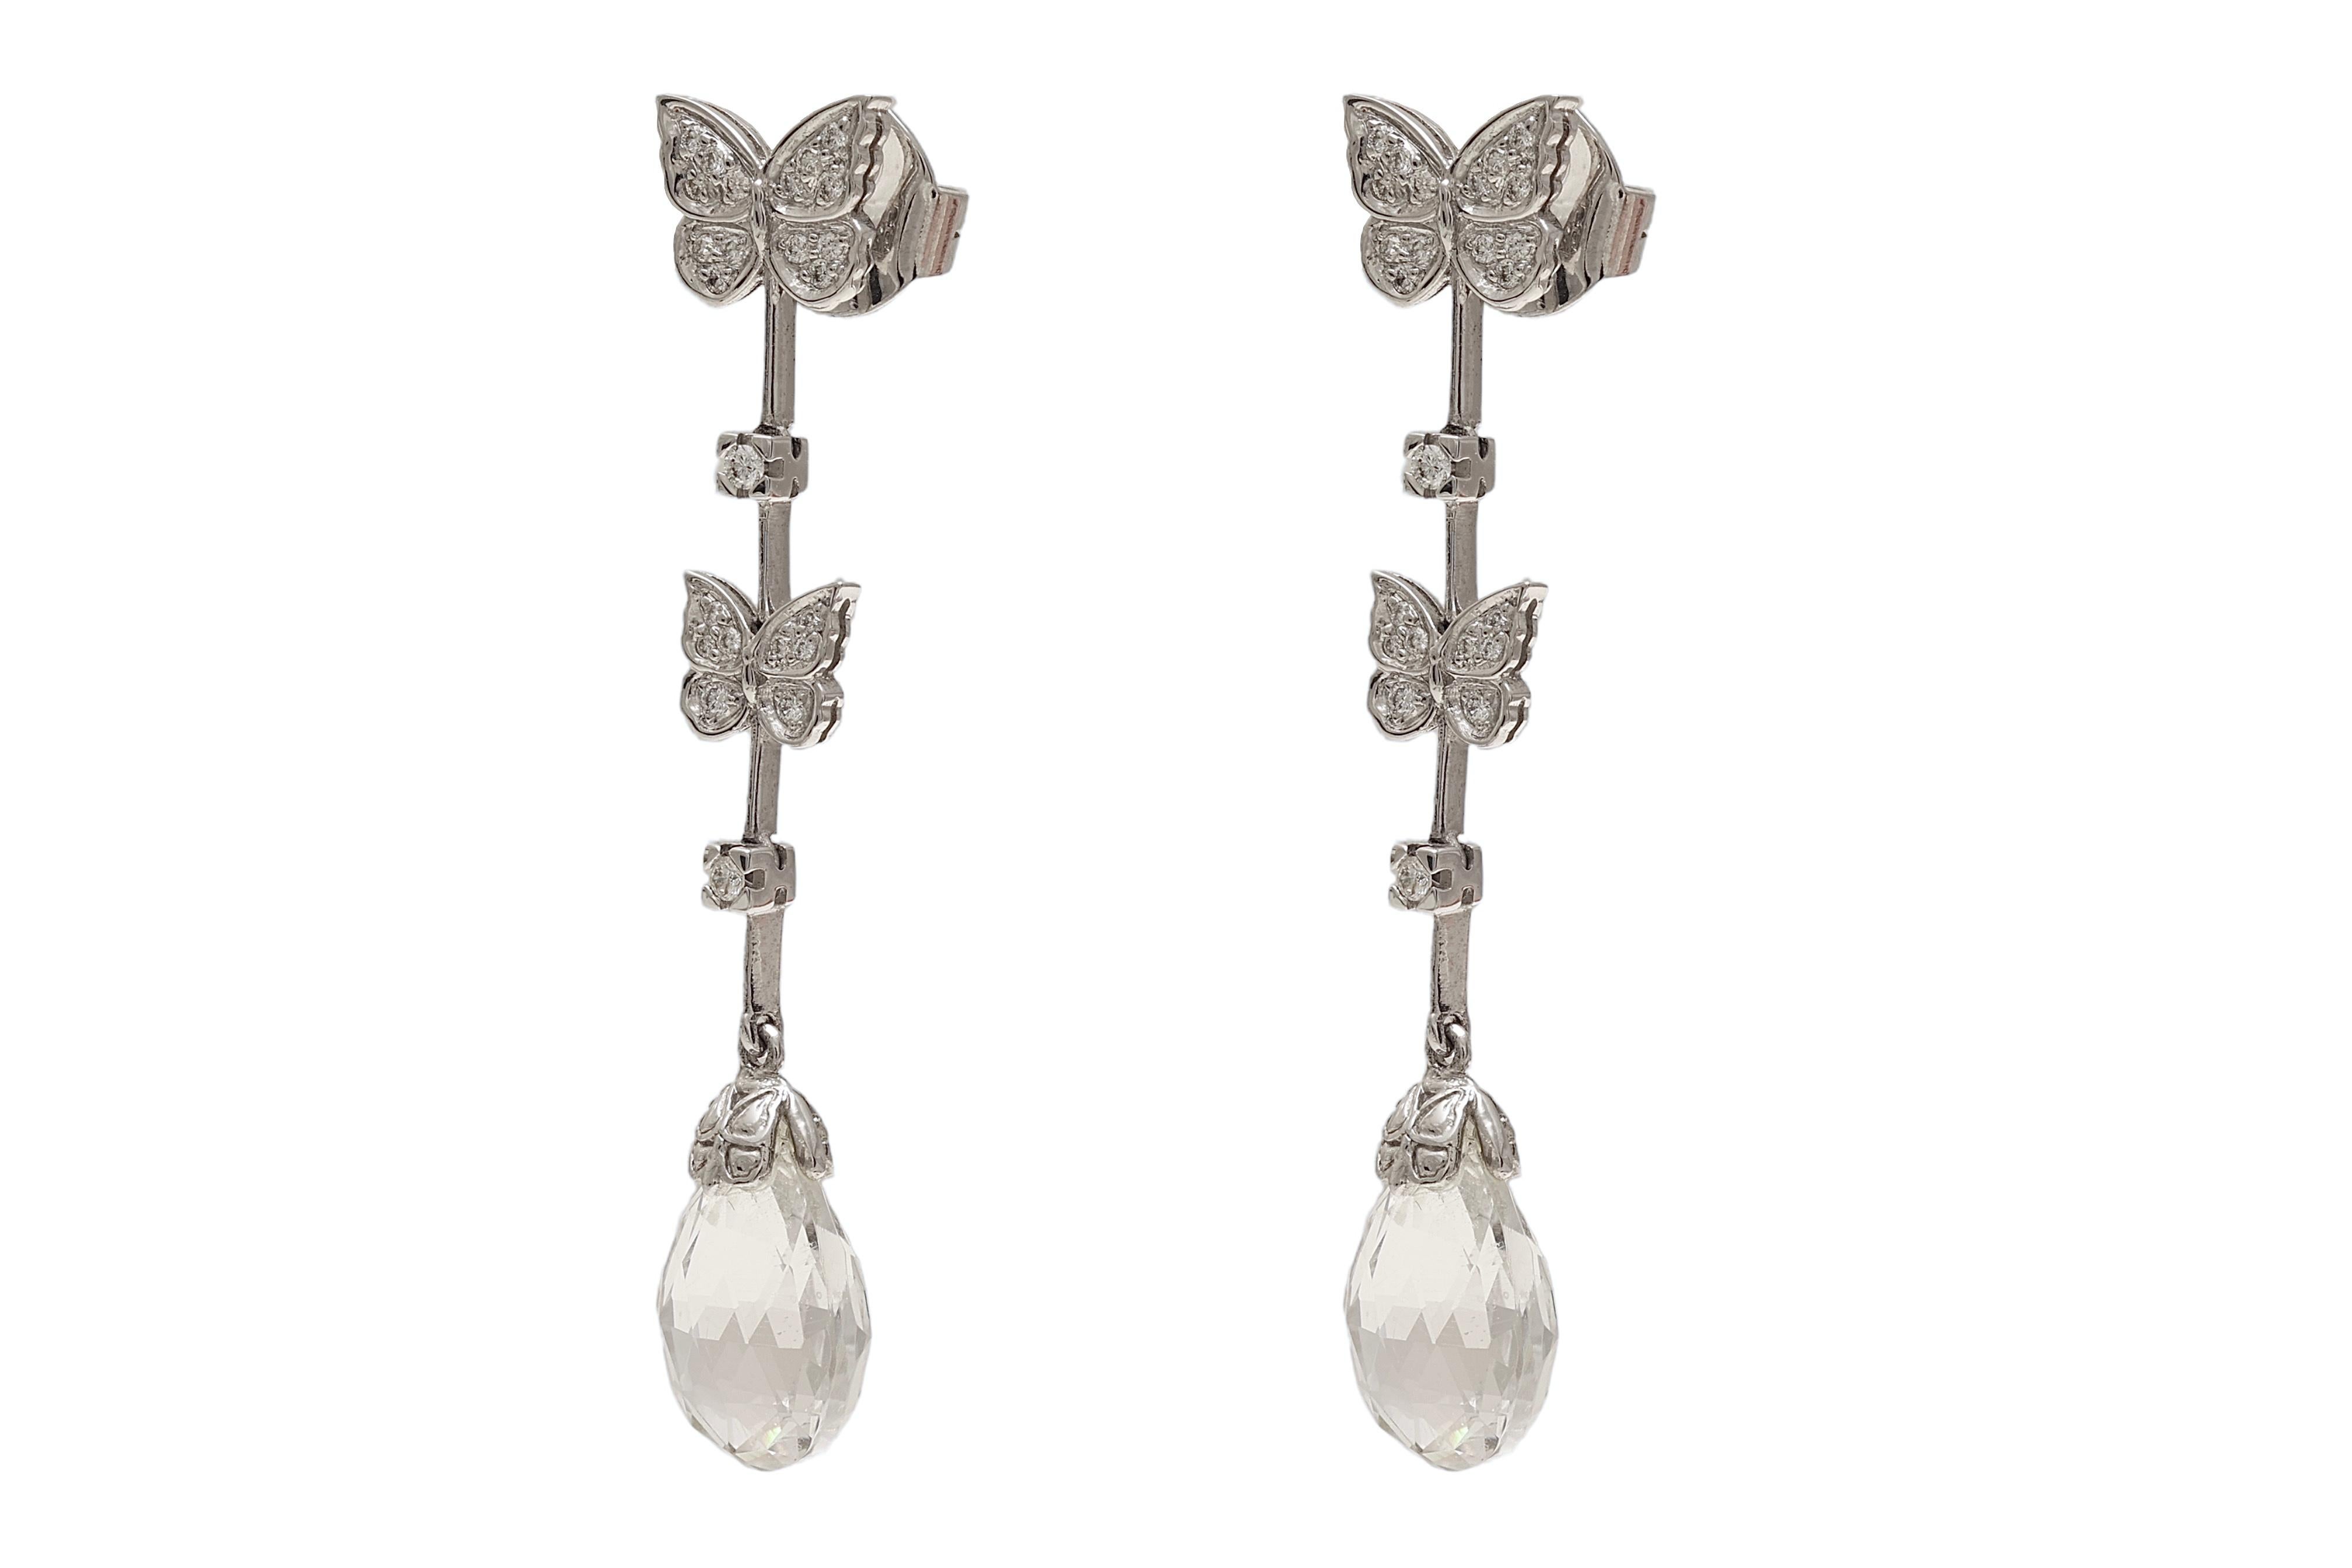 Beautiful Carrera y Carrera Baile De Mariposas Butterflies 18 kt. White Gold Earrings 

Diamonds: Brilliant cut diamonds together 0.34 ct. 

Gemstone: 2 Rock Crystals 13.6 mm x 8.8 mm

Material: 18 kt. solid White gold

Measurements: 49.8 mm x 8.8